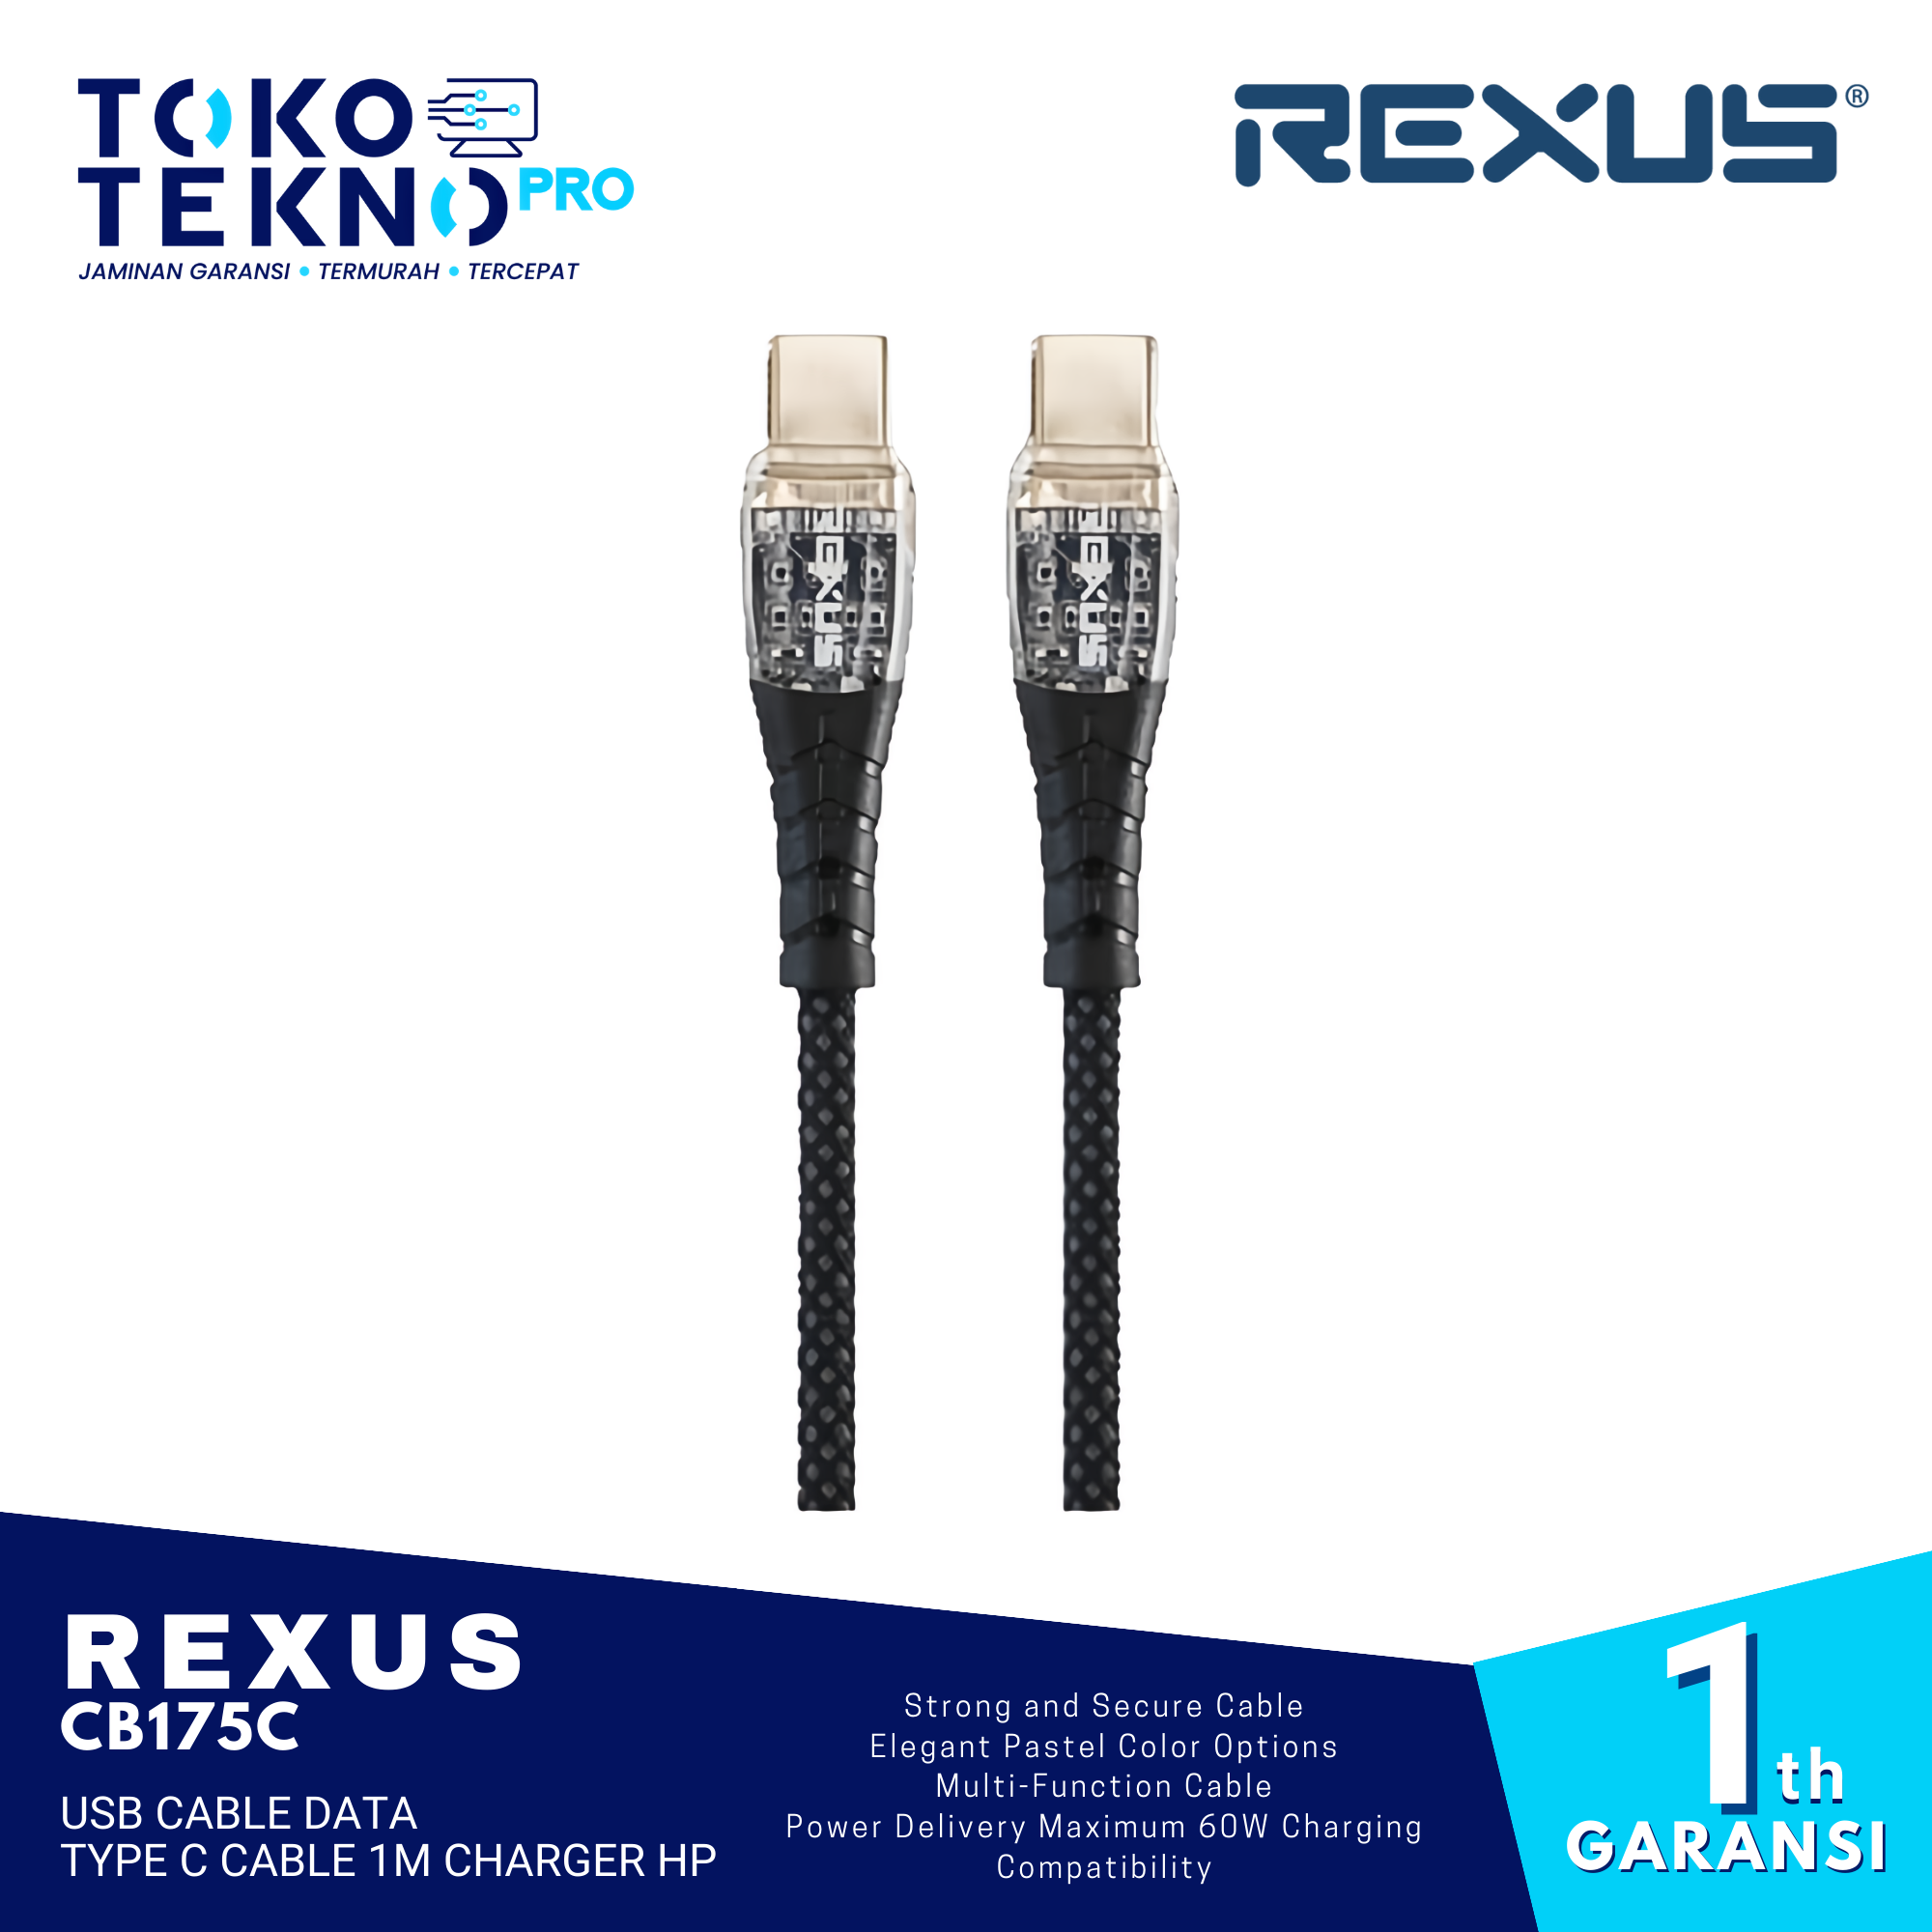 Rexus CB175C USB Cable Data Type C Cable 1m Charger HP